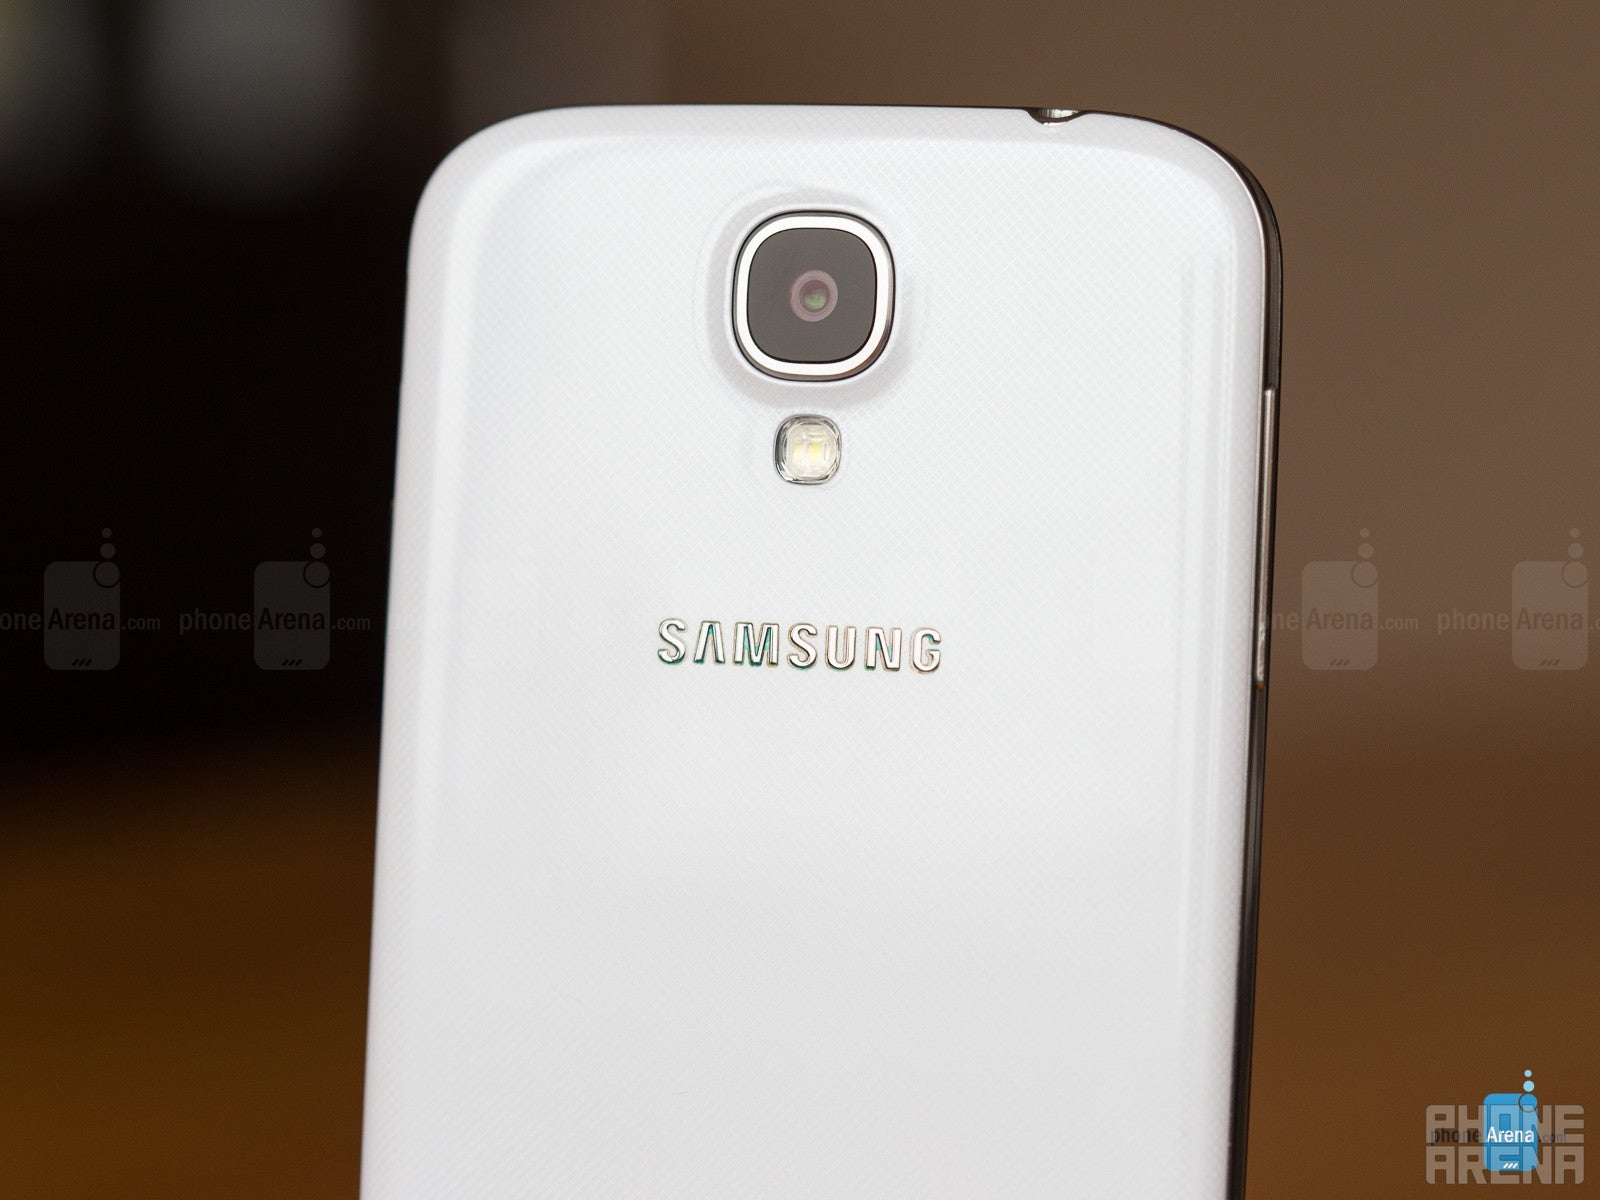 Samsung Galaxy S4 review (one year later)